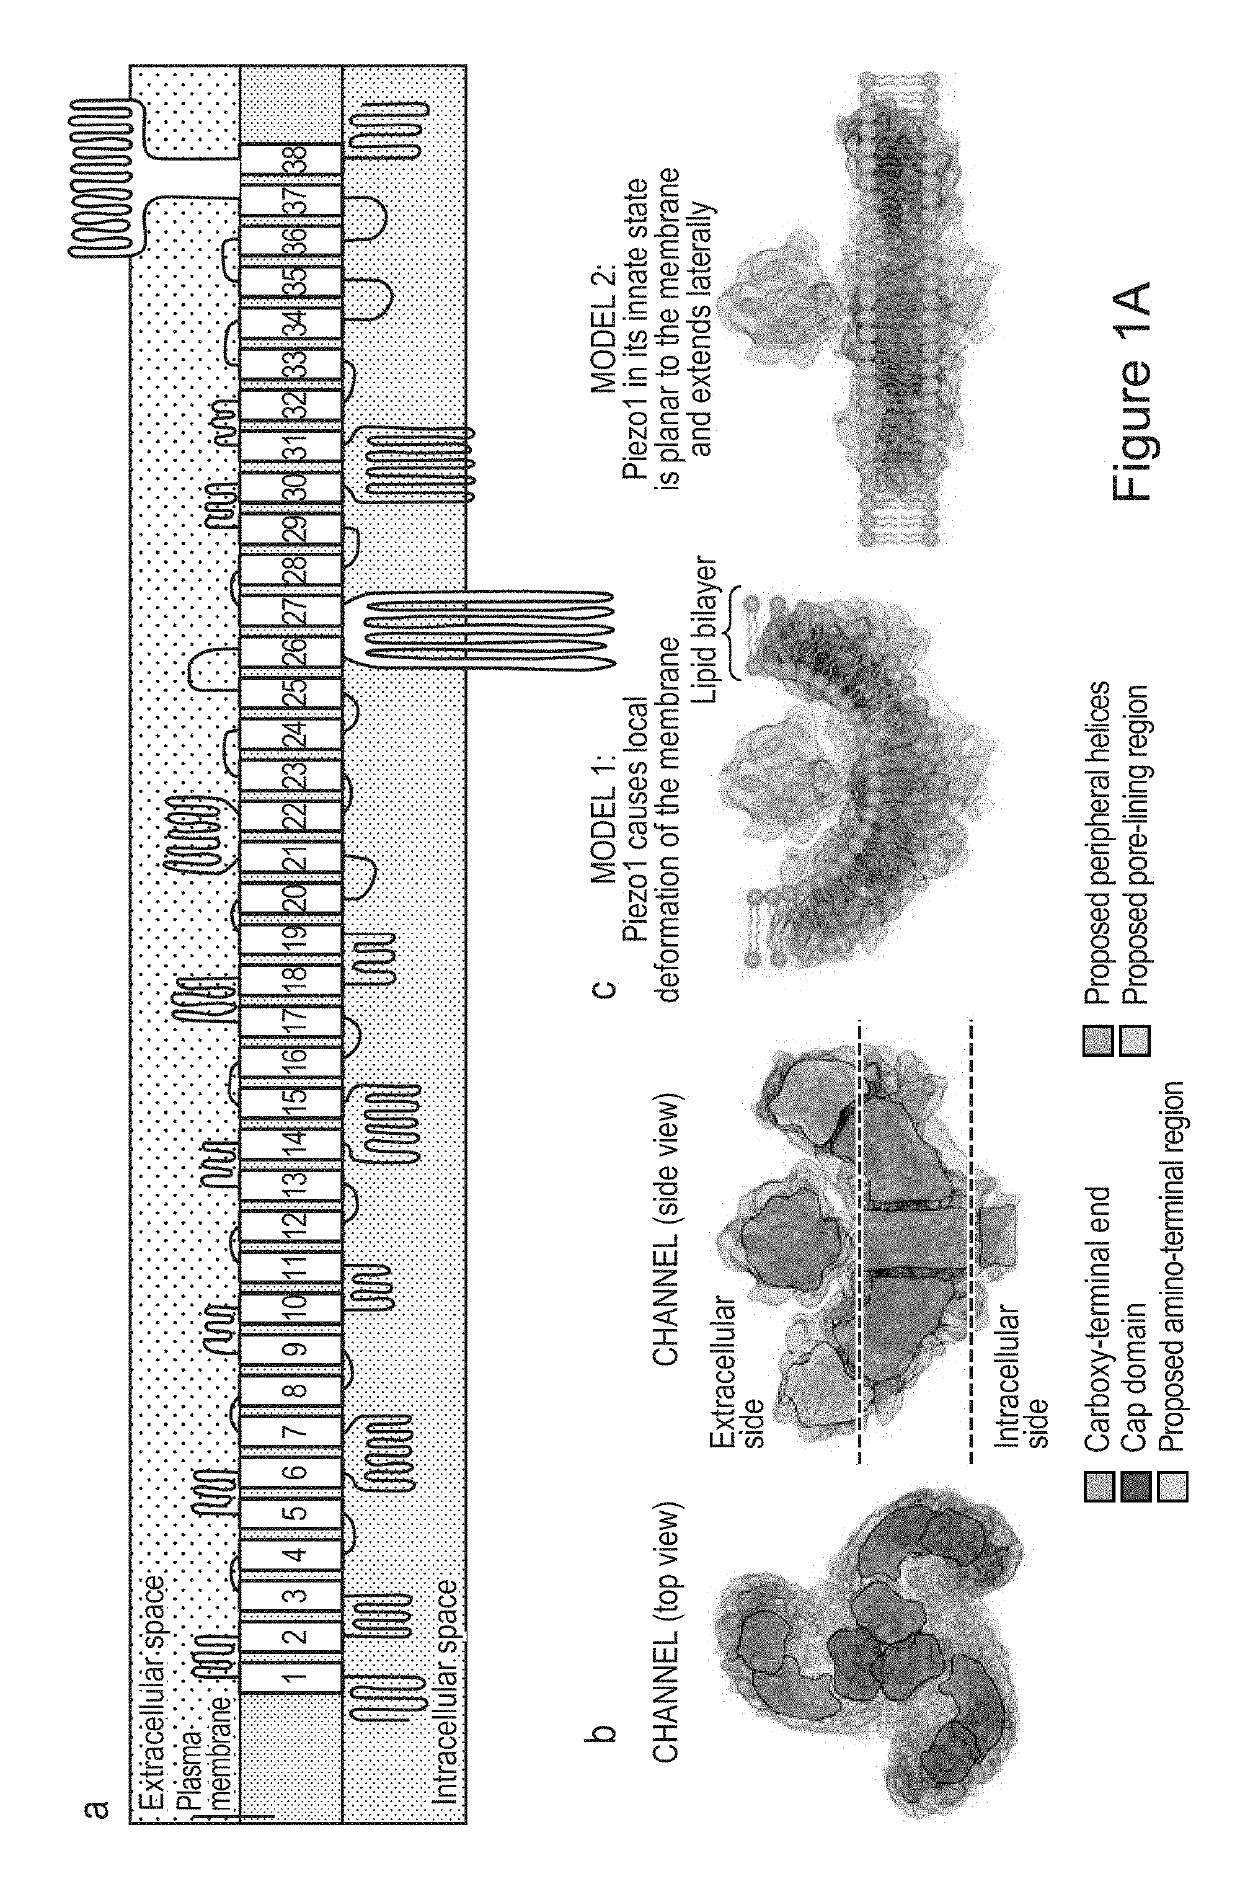 Devices and methods for treatment of anxiety and related disorders via delivery of mechanical stimulation to nerve, mechanoreceptor, and cell targets